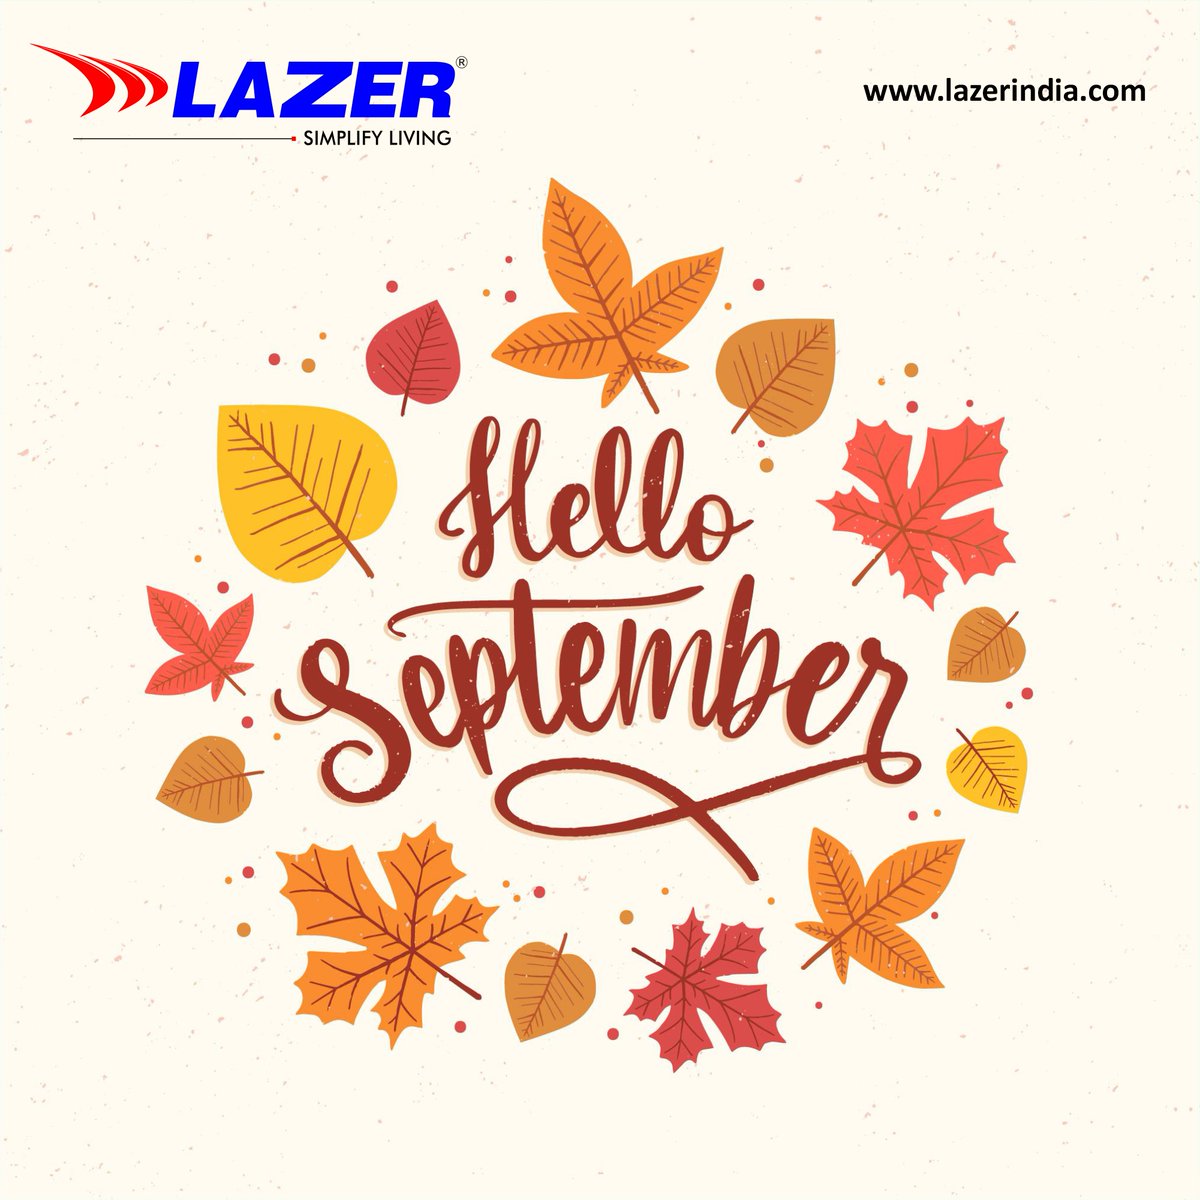 Hello September! Say goodbye to chaos and hello to seamless living with Lazer India appliances.🍂🏡

#lazerindia #lazer #waterheater
#Homeappliances  #bathroomappliances #kitchenappliances #simplifyliving #ceilingfans #irons #HelloSeptember  #September2023 #G20Summit2023